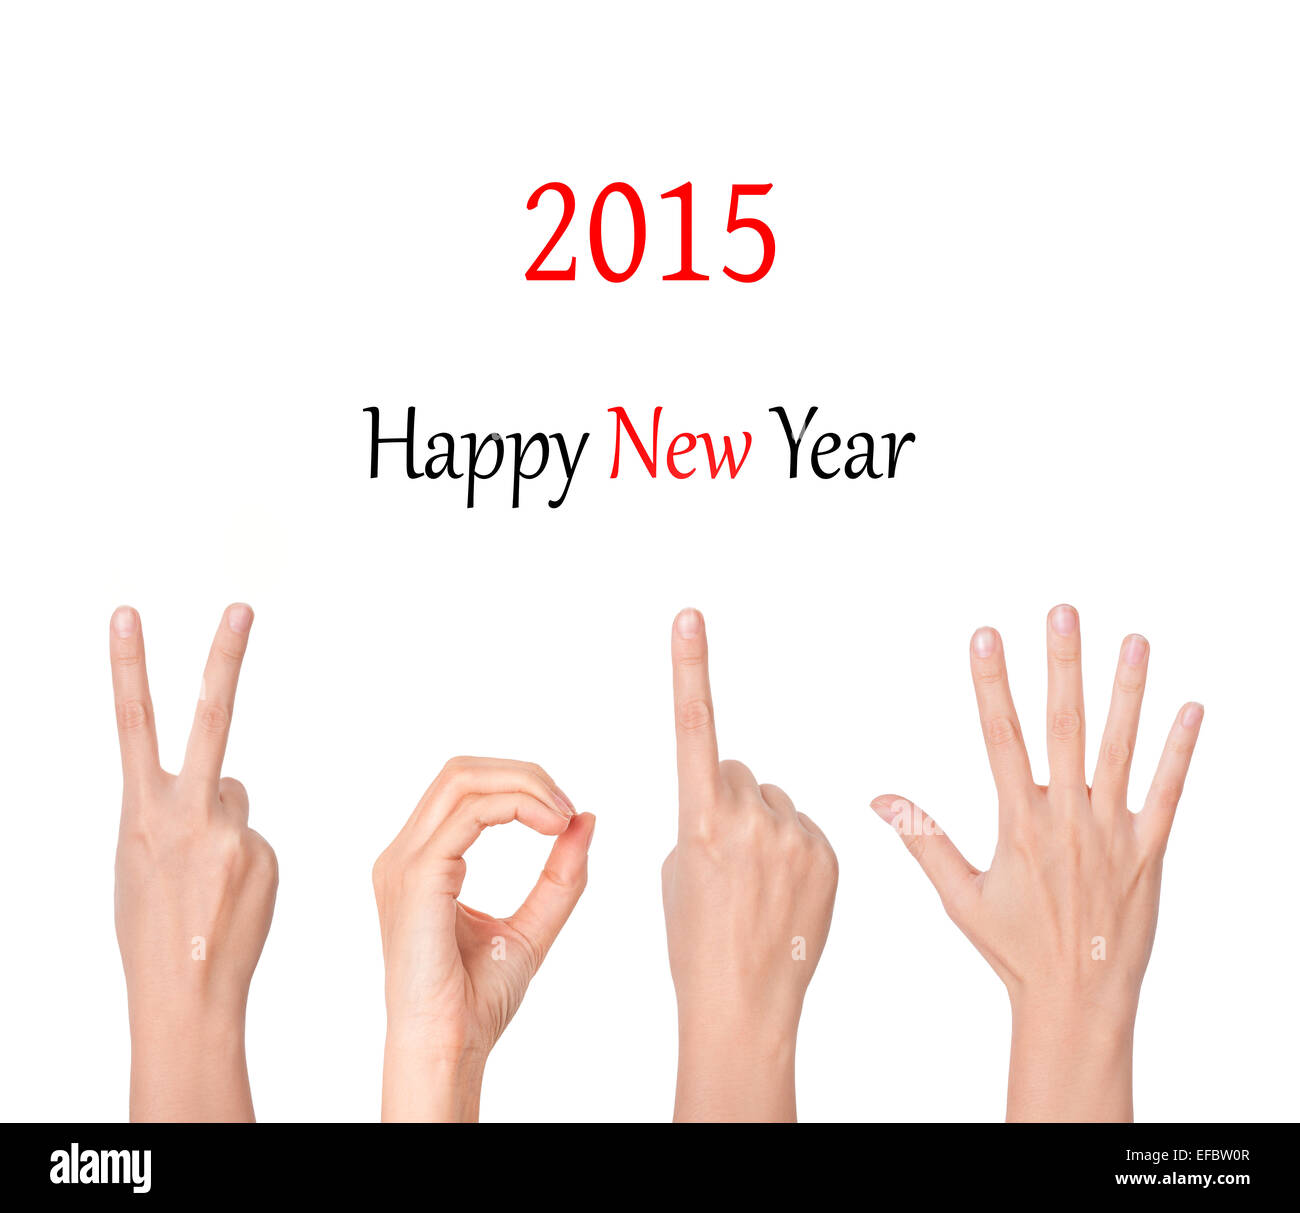 2015 new year showing Stock Photo